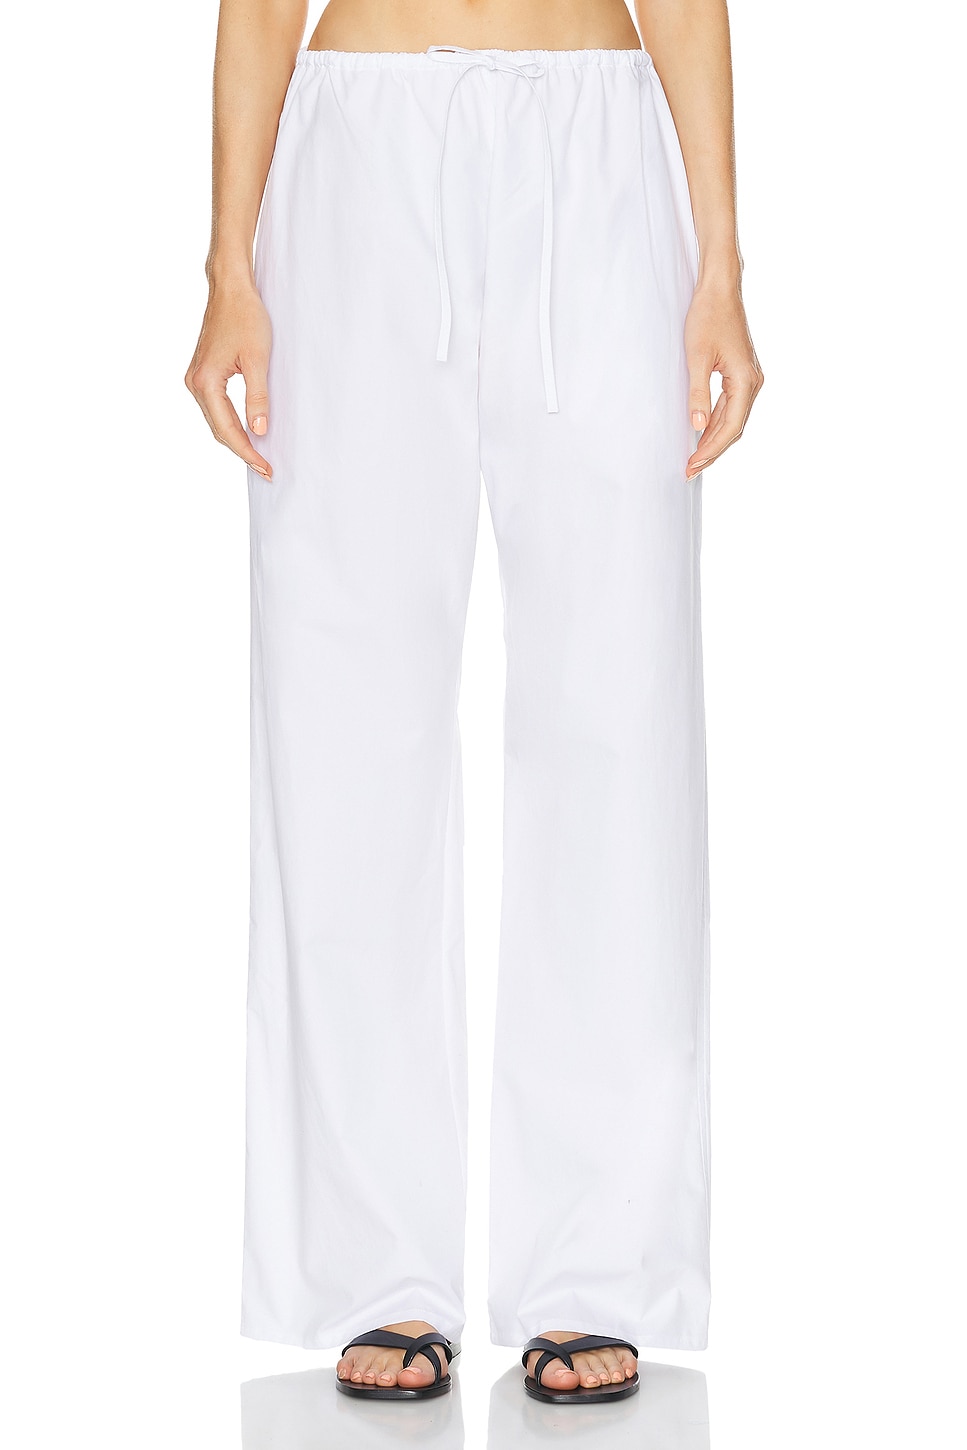 Image 1 of Matteau Drawcord Pant in White